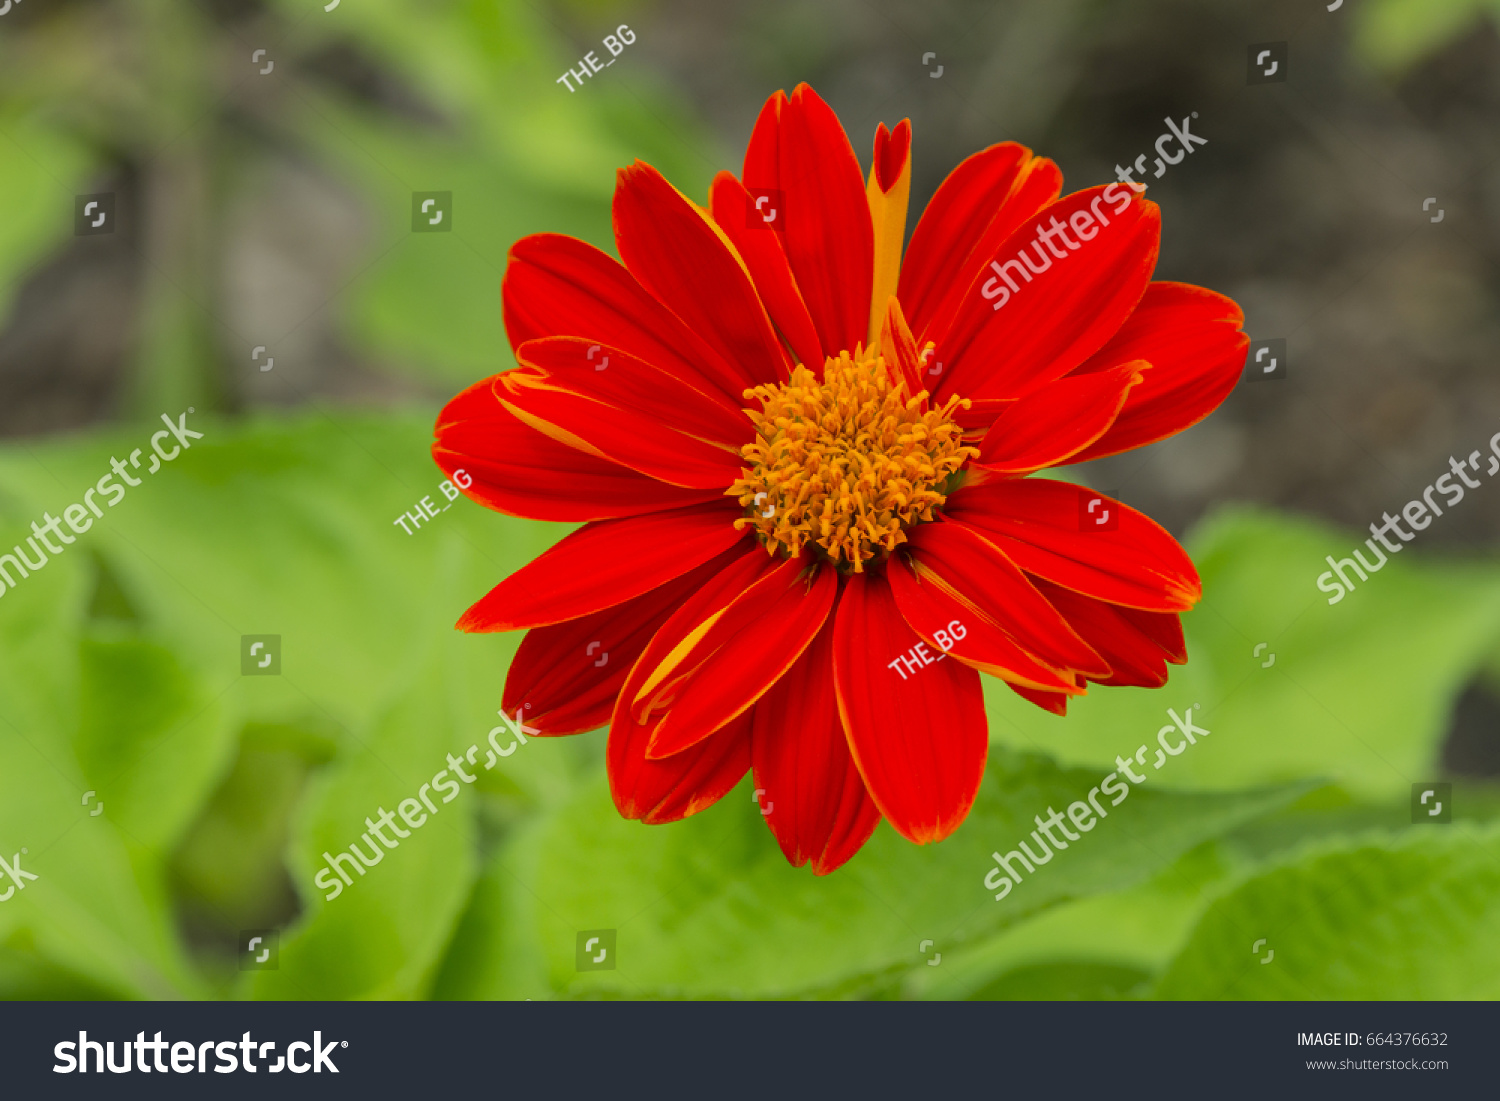 Tithonia Rotundifolia Mexican Sunflower Red Flower Stock Photo Edit Now 664376632